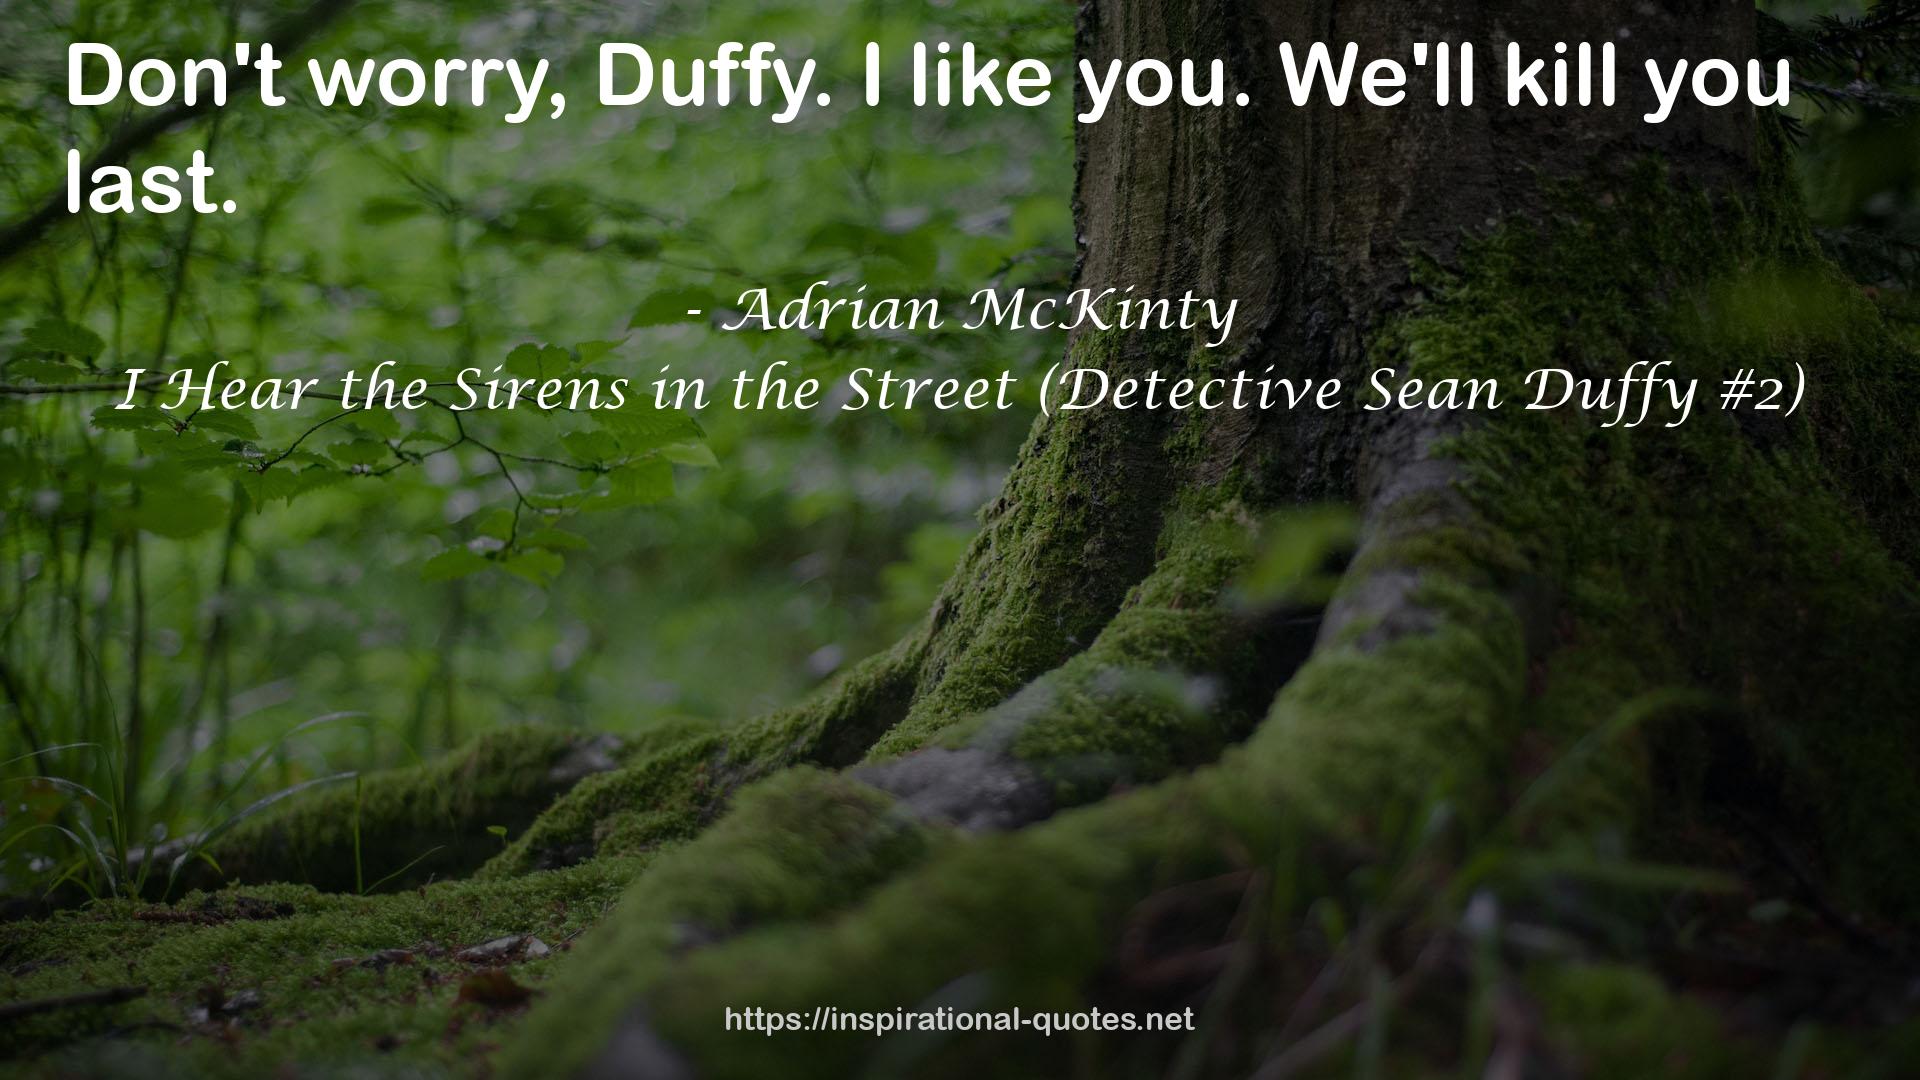 I Hear the Sirens in the Street (Detective Sean Duffy #2) QUOTES